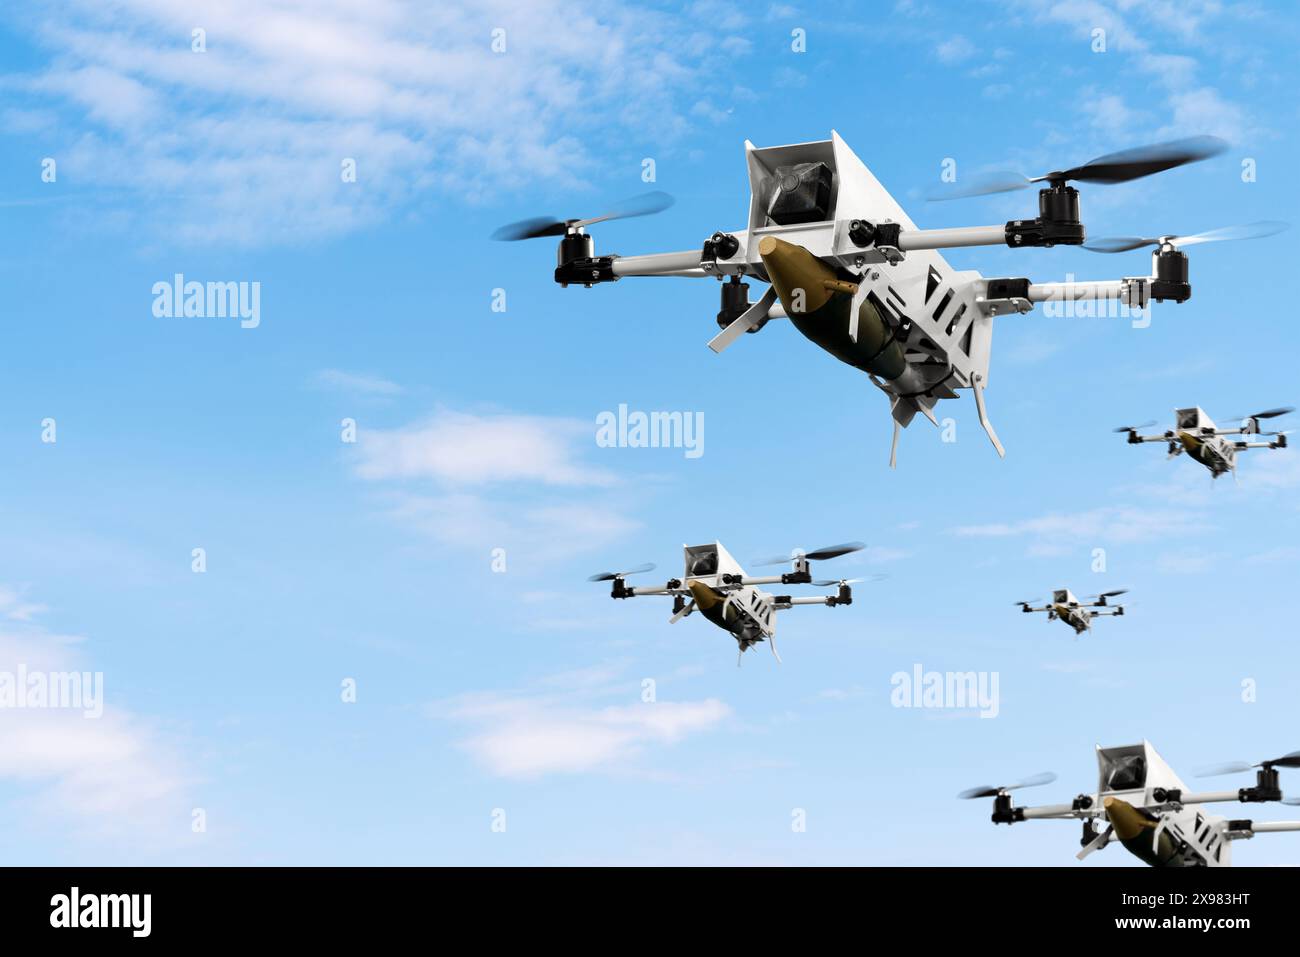 Military kamikaze drones with aerial bombs fly in front of blue sky. War of drones. Unmanned aerial vehicle. Stock Photo